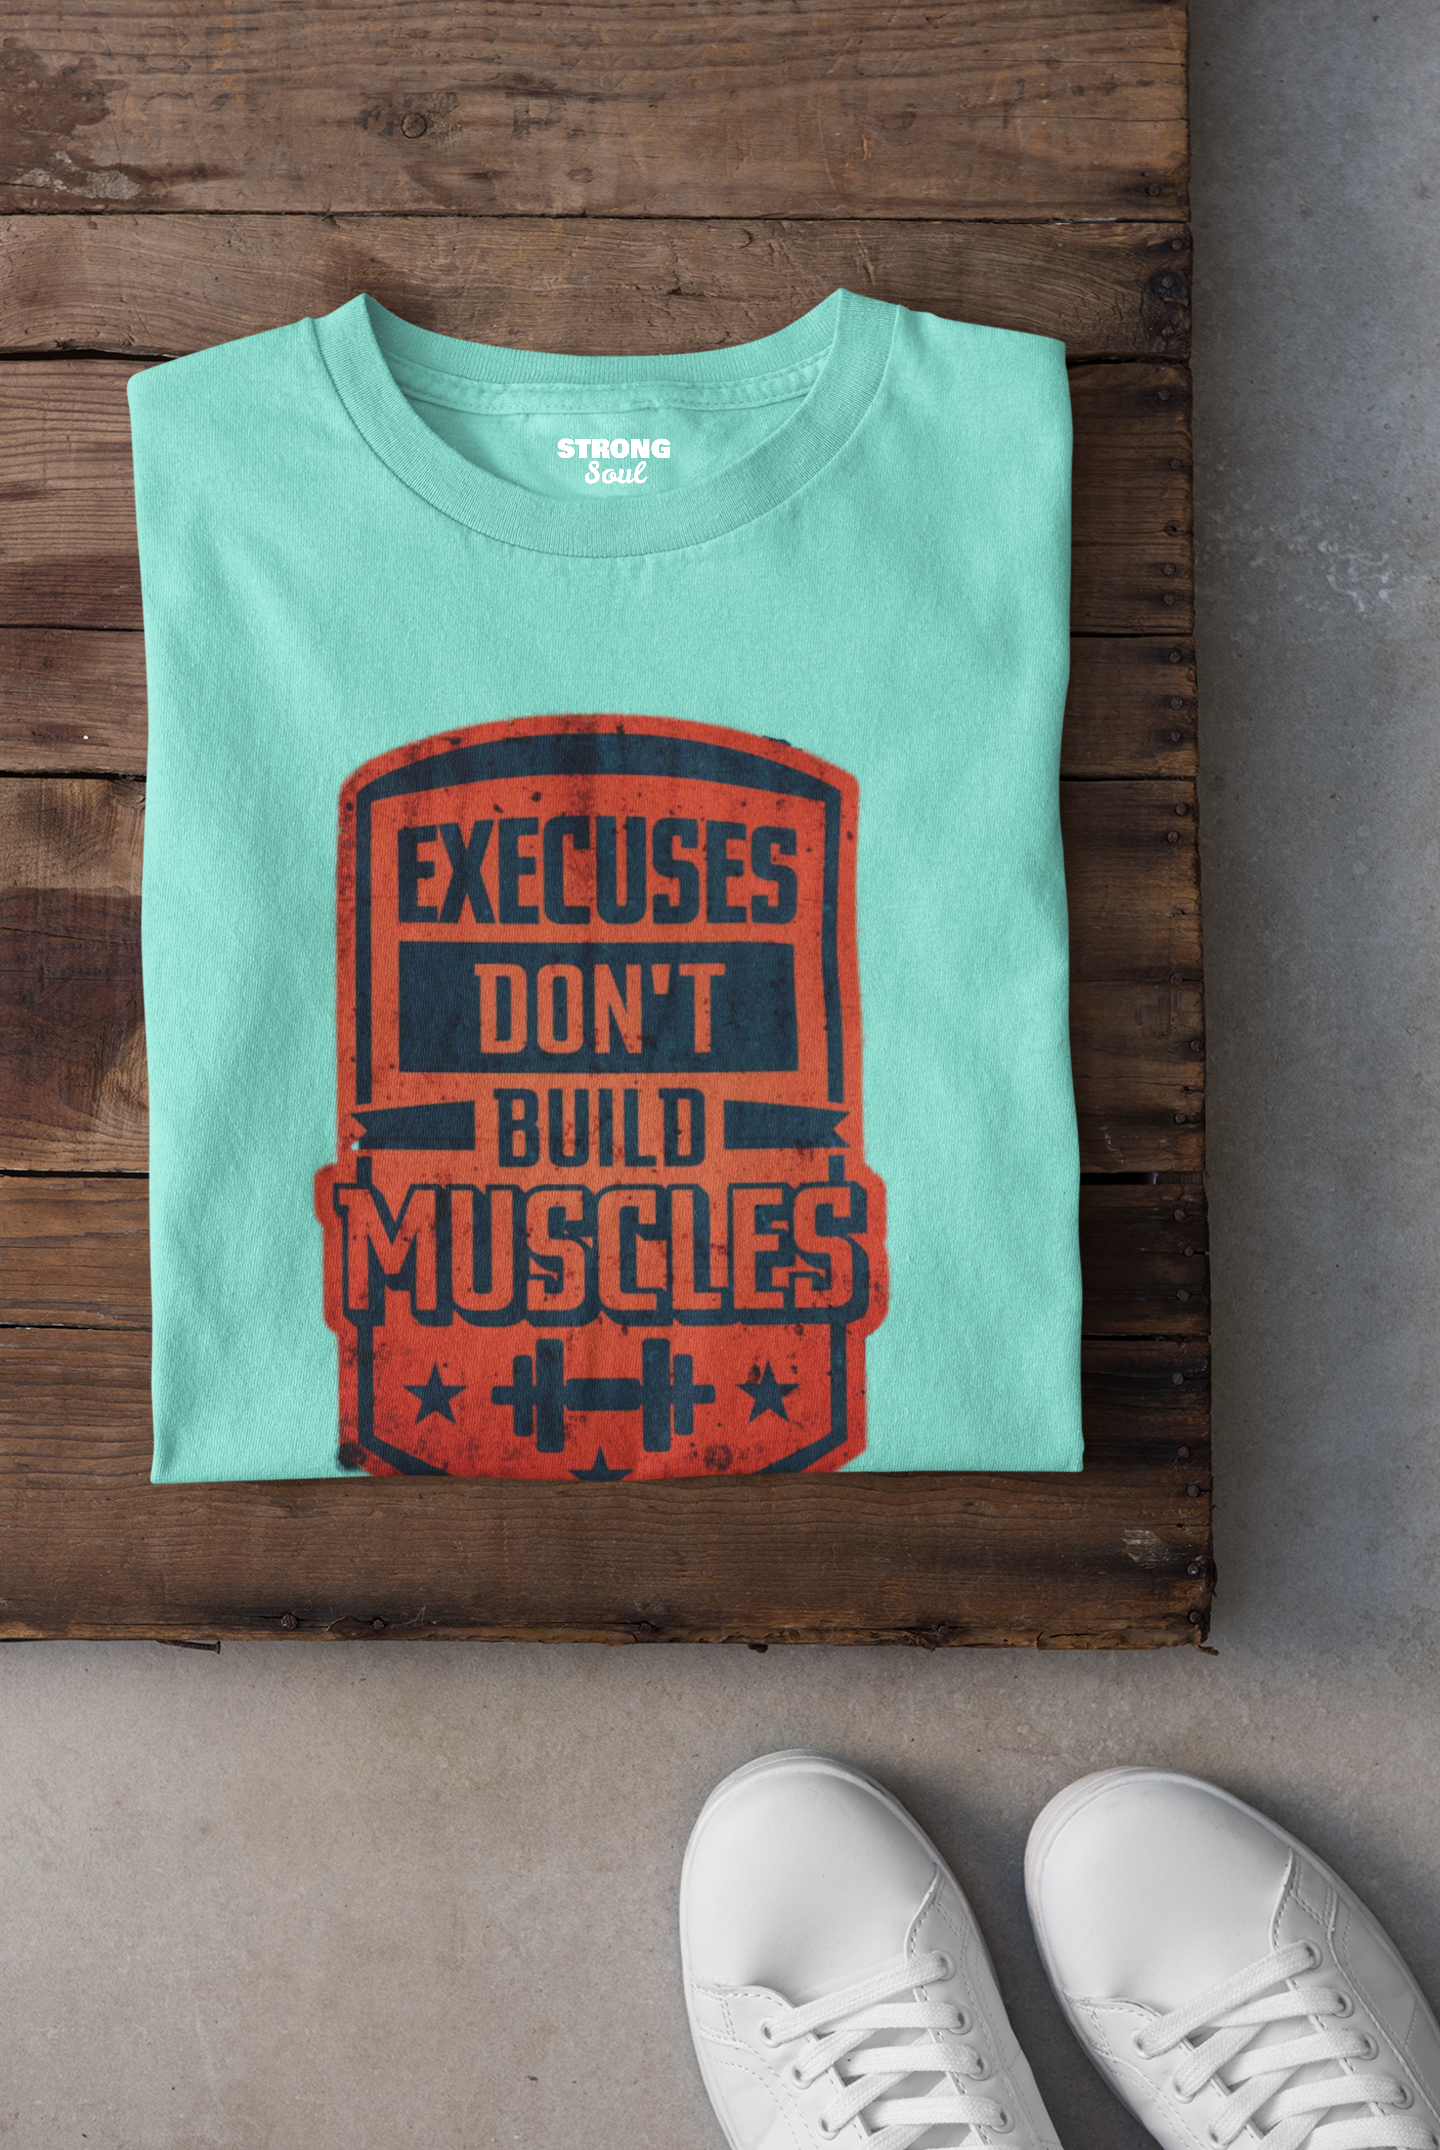 Excuses Do Not Build Muscles - Gym T Shirt Strong Soul Shirts & Tops